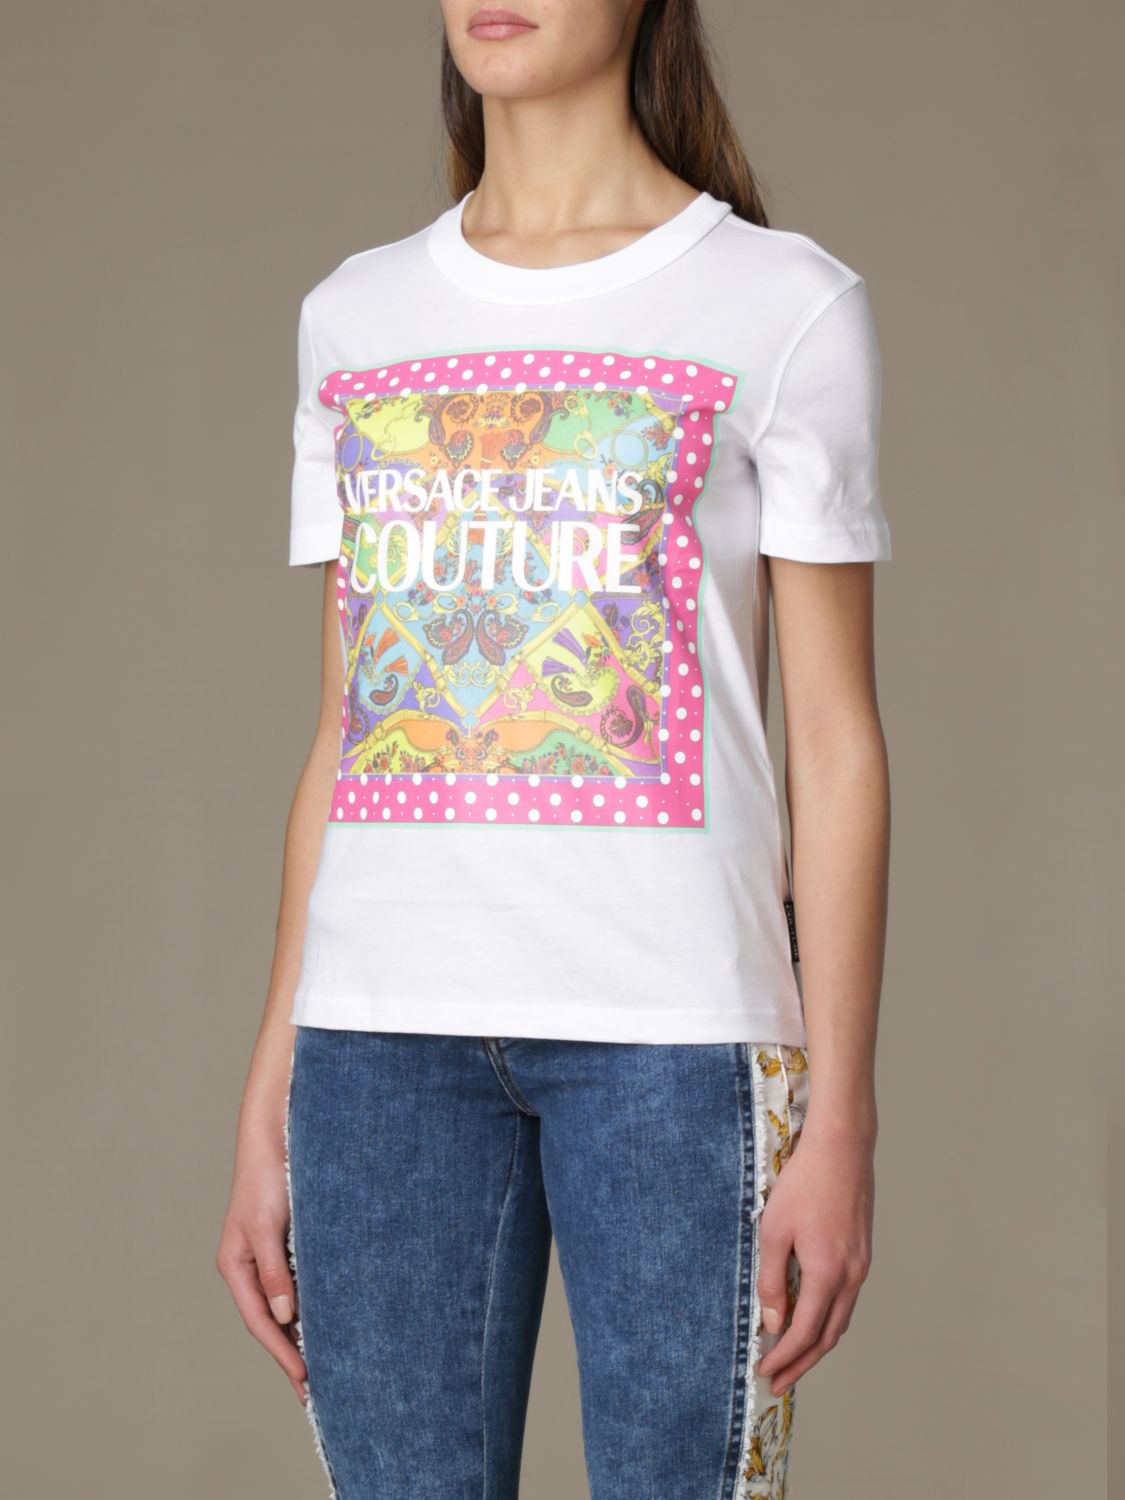 VERSACE JEANS COUTURE: T-shirt with Paisley print | T-Shirt Versace ...